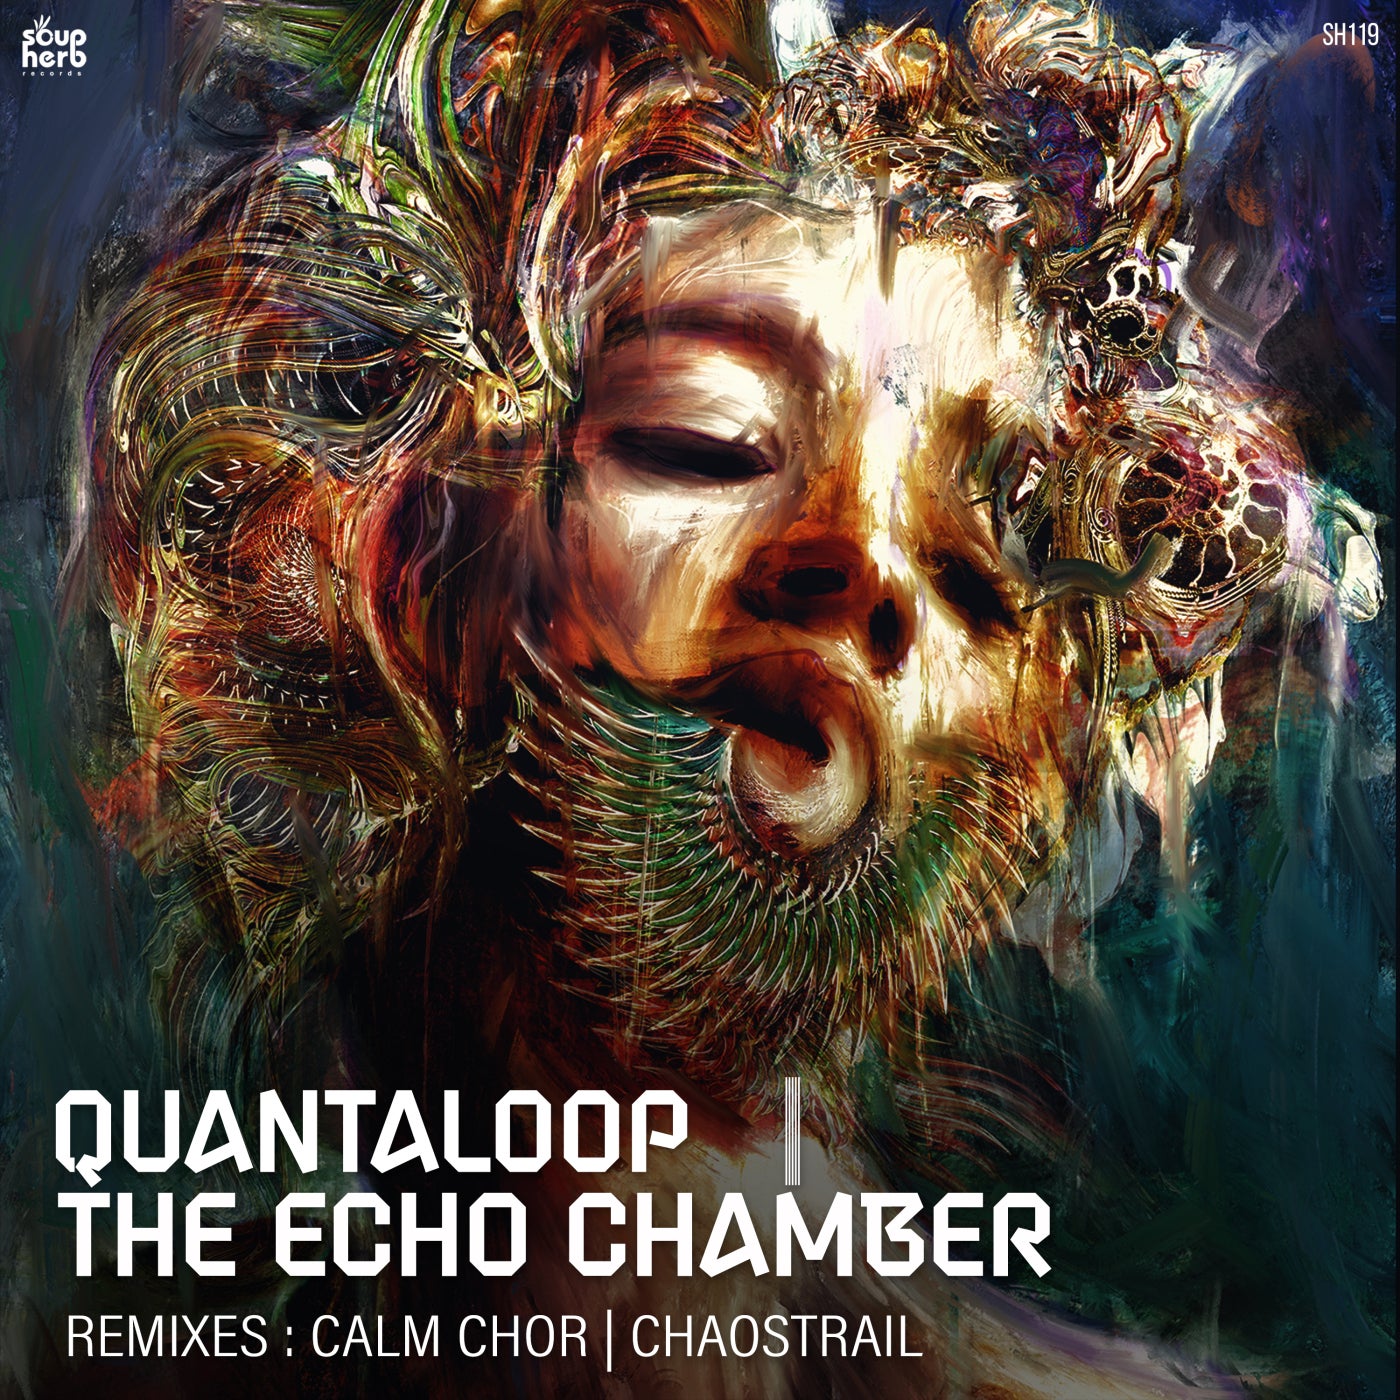 Download Quantaloop - The Echo Chamber on Electrobuzz